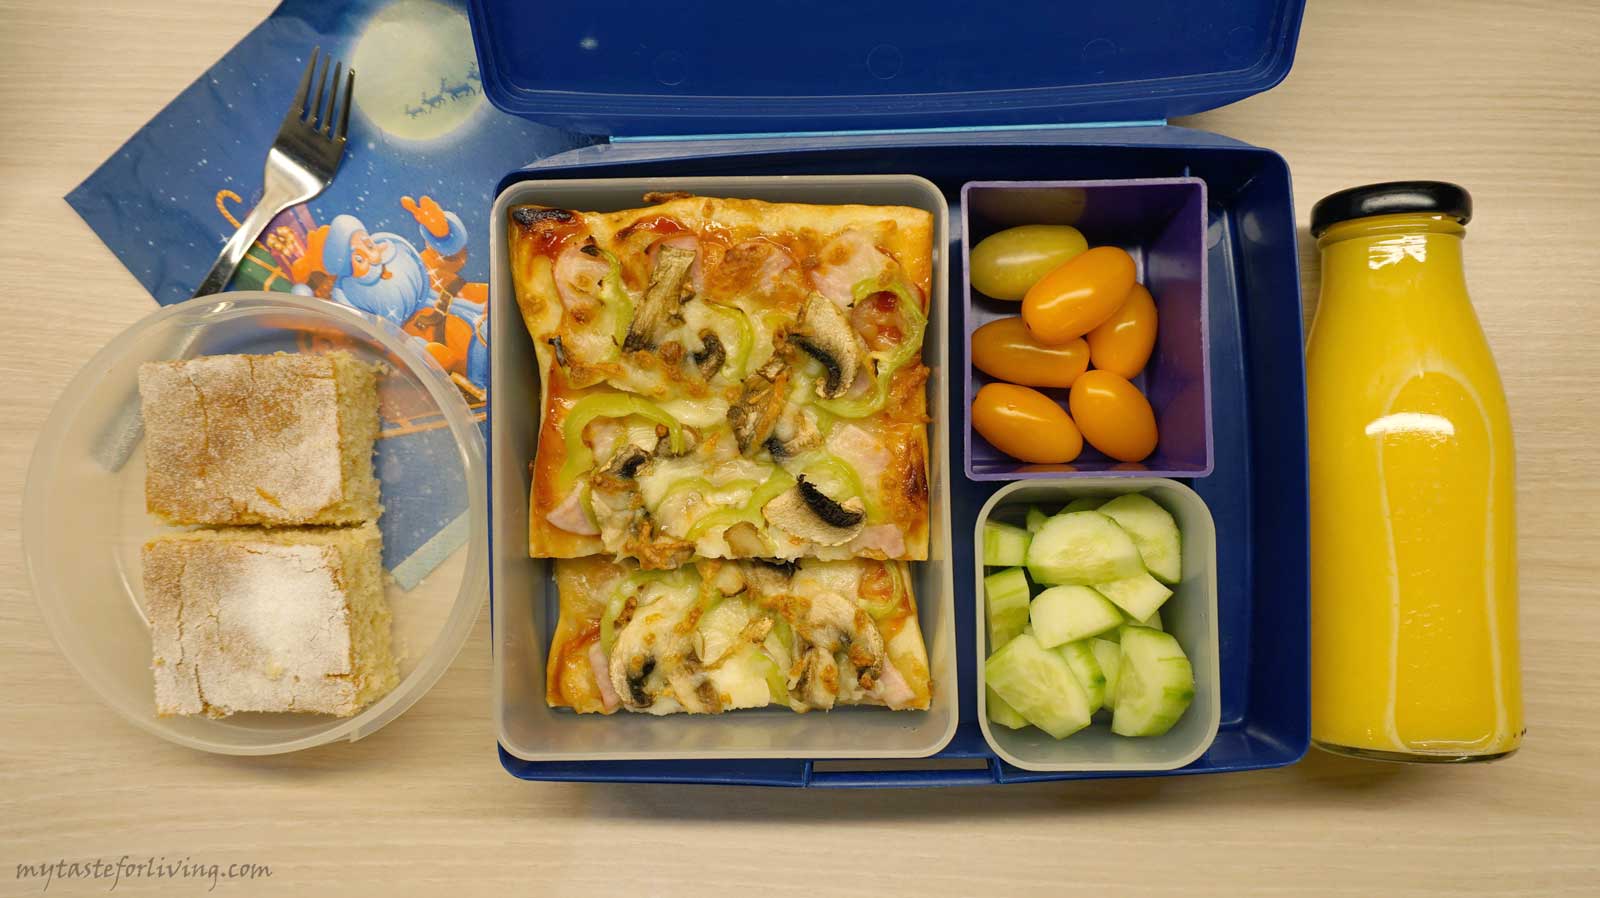 5 Ideas for homemade food in a lunchbox